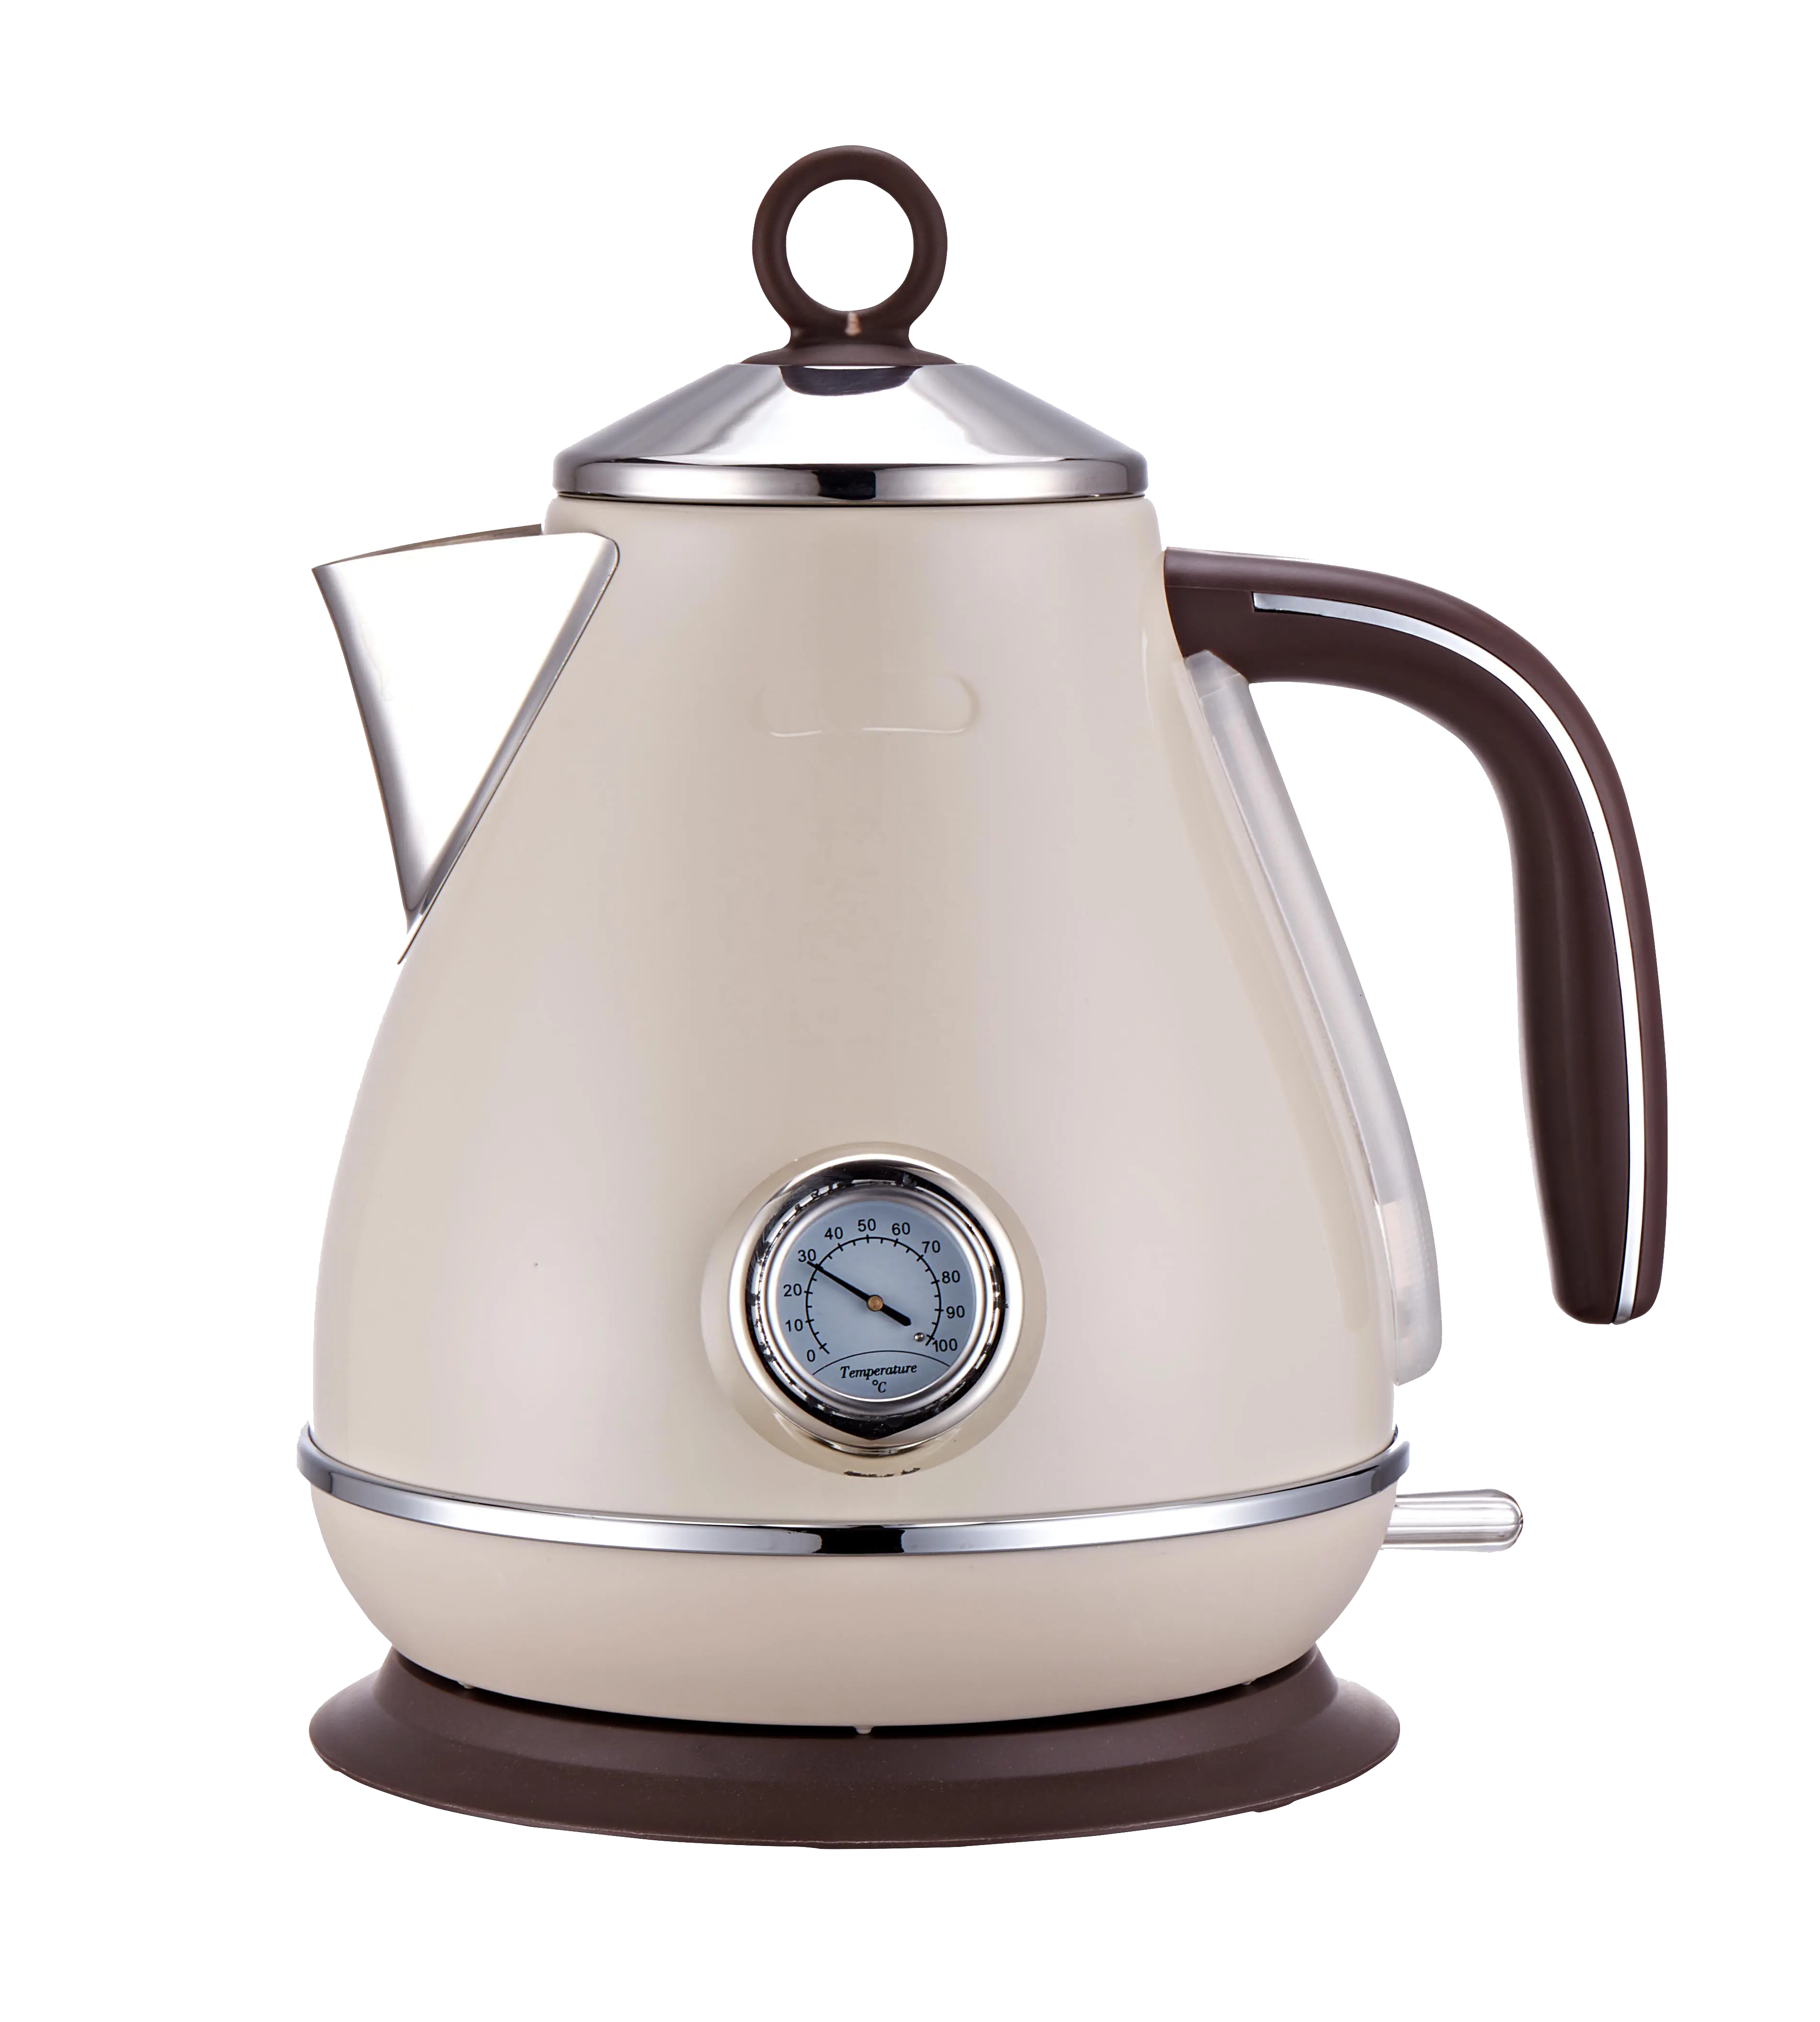 New style High quality Hotel home school Kitchen appliance 1.7L waterkettle meter electric stainless steel cordless kettle